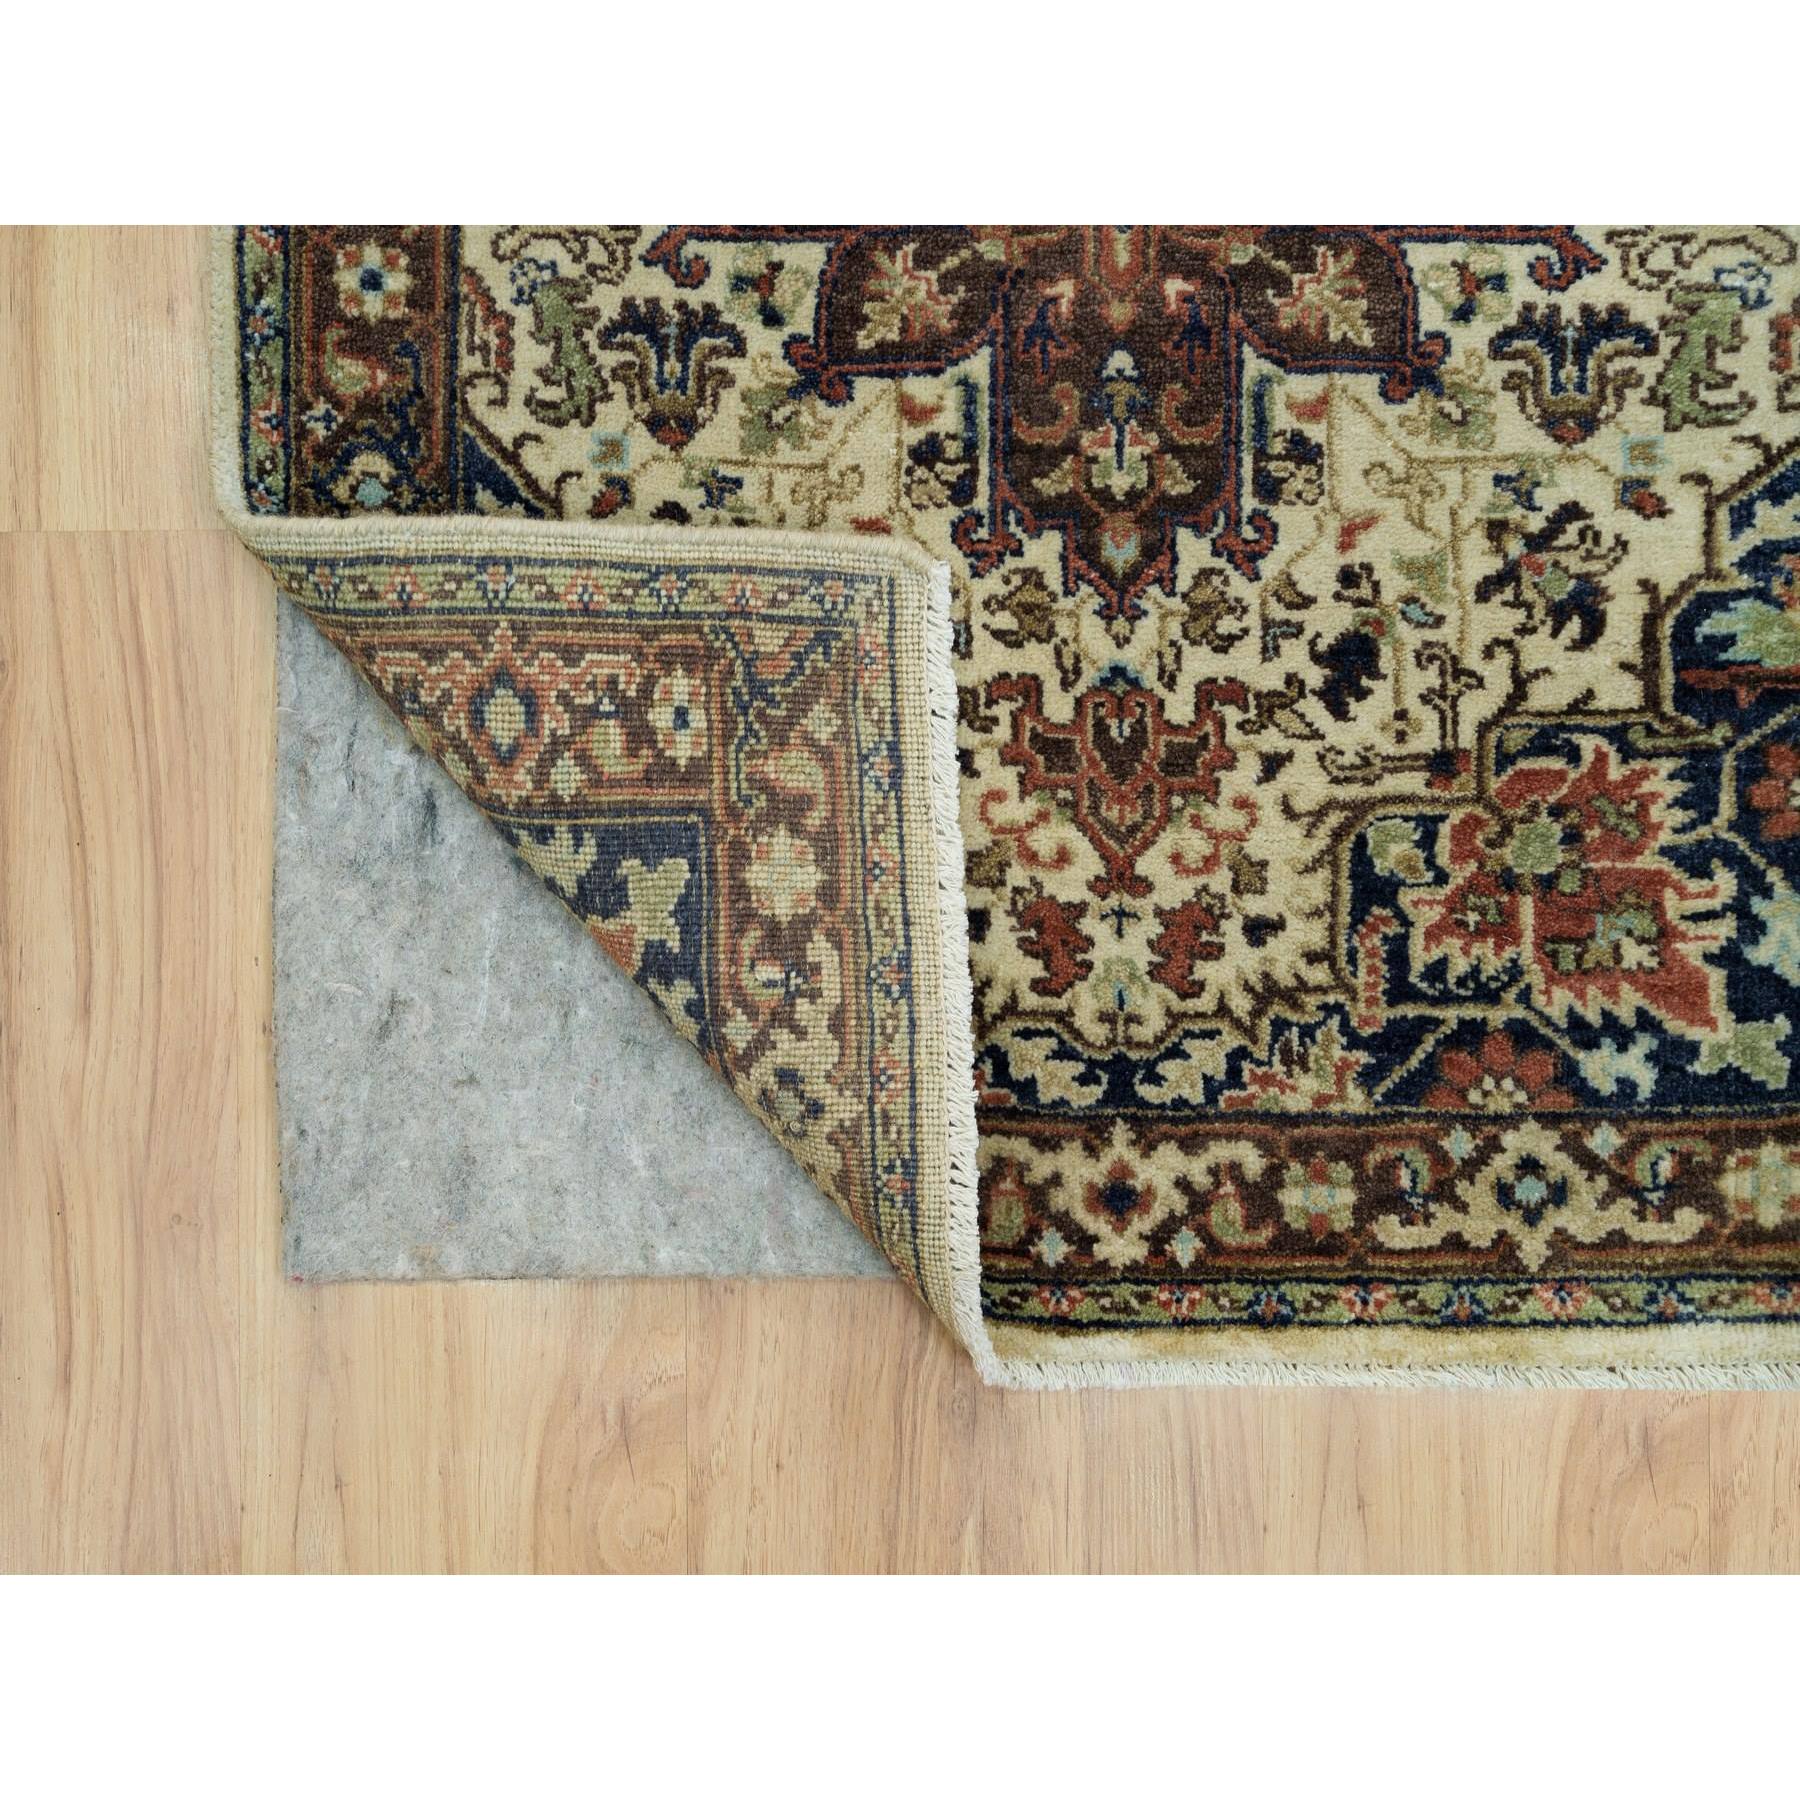 2'6"x12'3" Chiffon Beige, Antiqued Heriz Re-Creation with Geometric Medallions, Vegetable Dyes, Natural Wool, Soft Pile, Hand Woven Runner Oriental Rug 